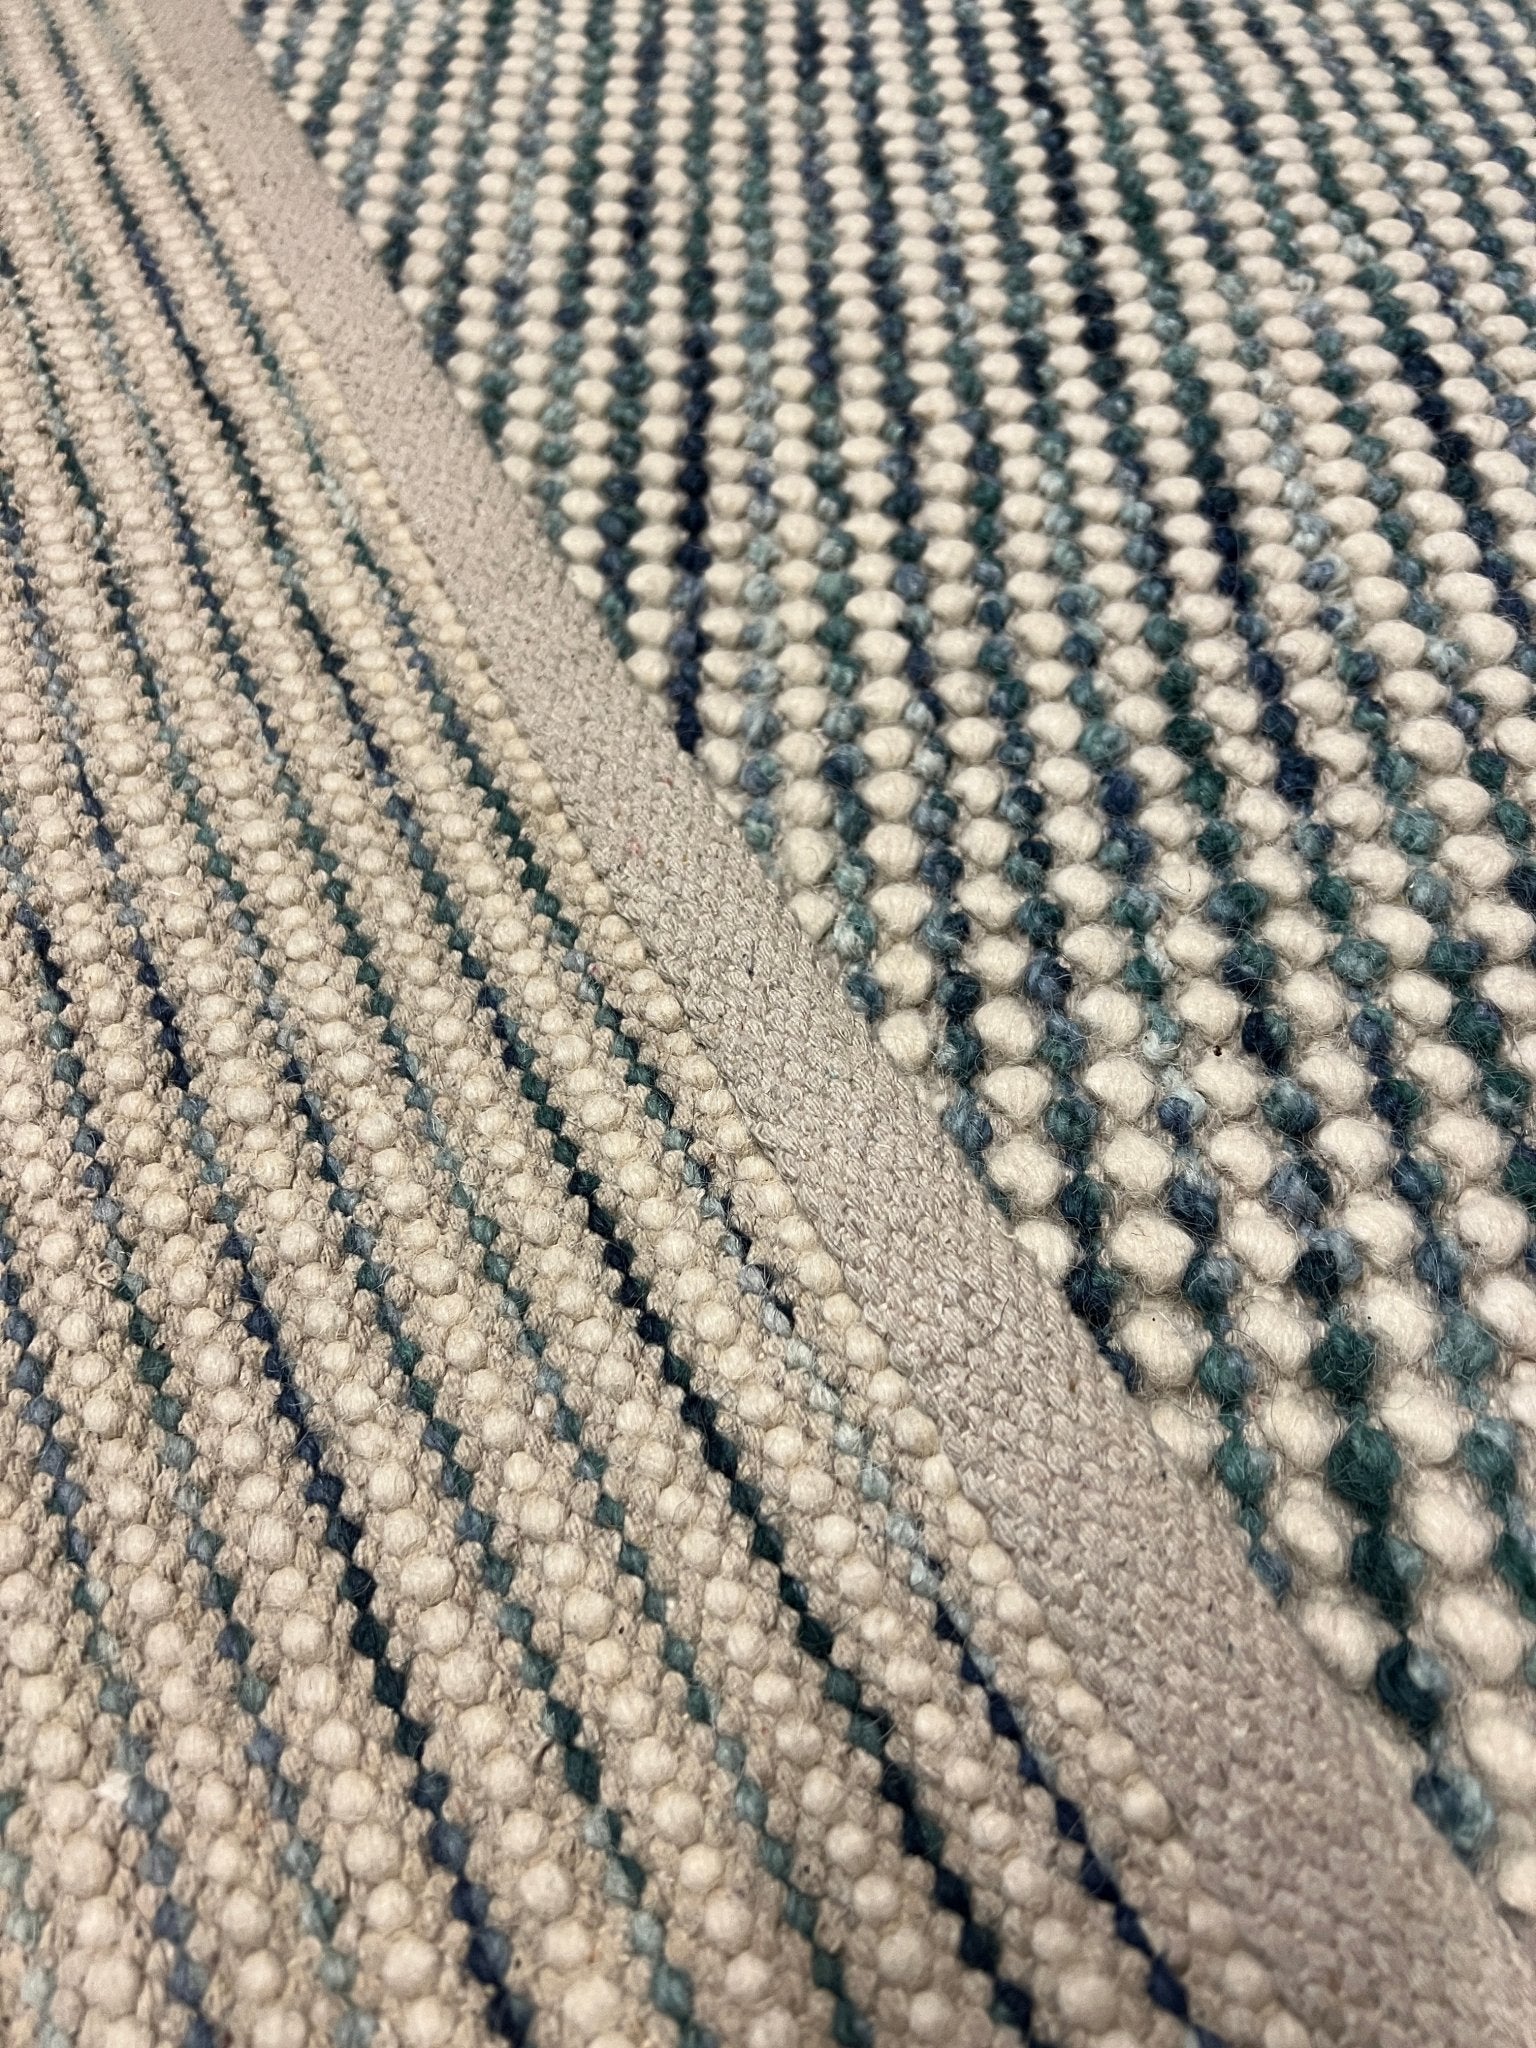 Connecticut Green/Blue 8x10 Hand Woven Durrie | Banana Manor Rug Company